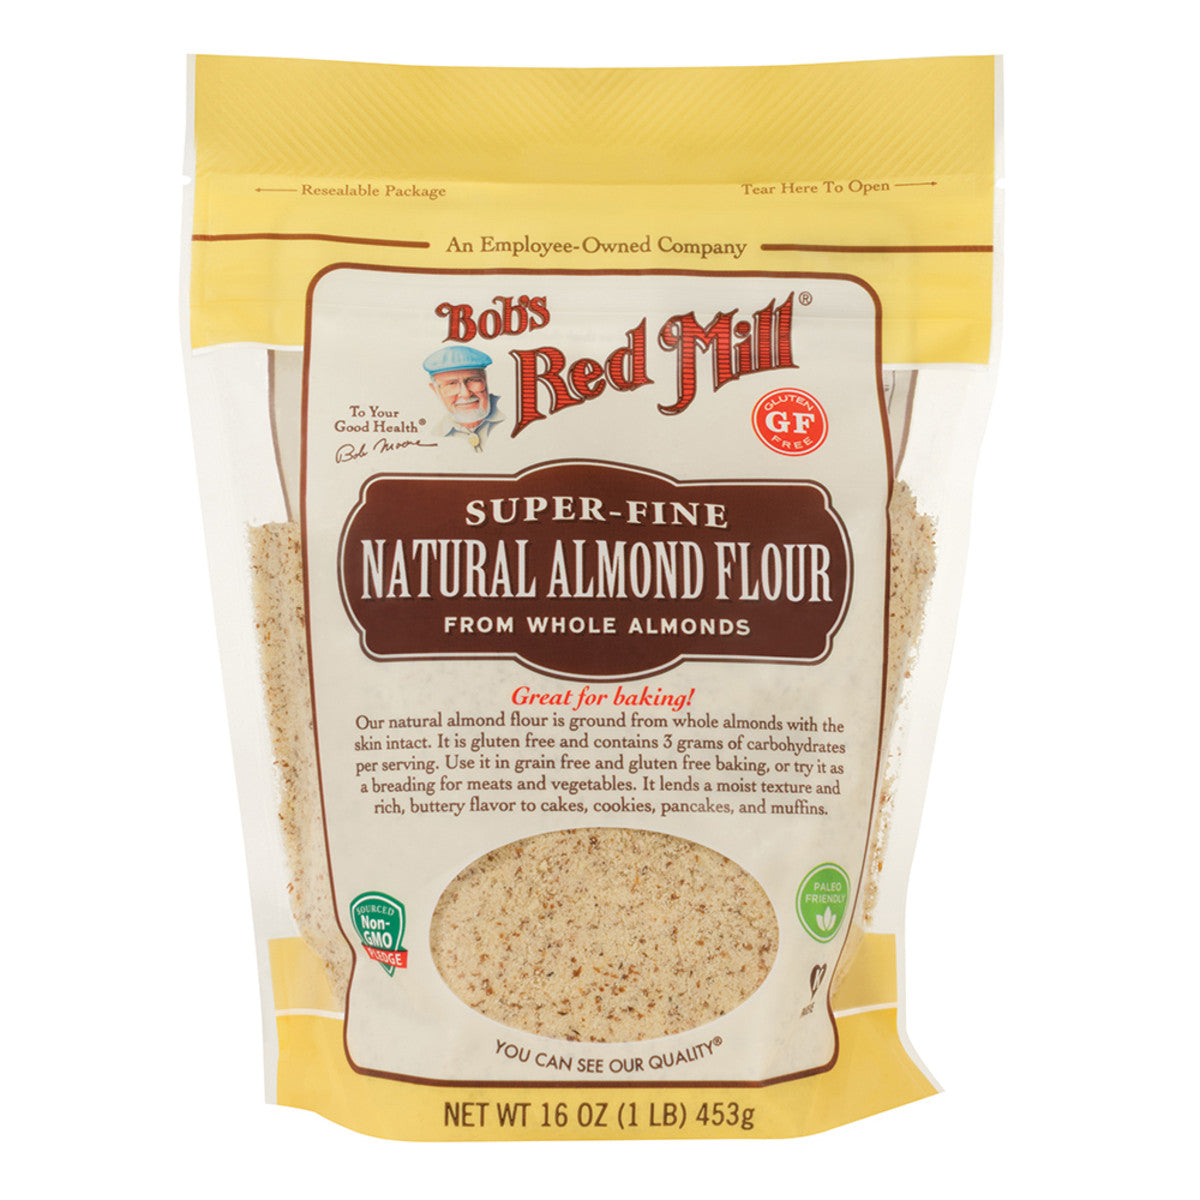 Bob's Red Mill - Almond Flour Natural